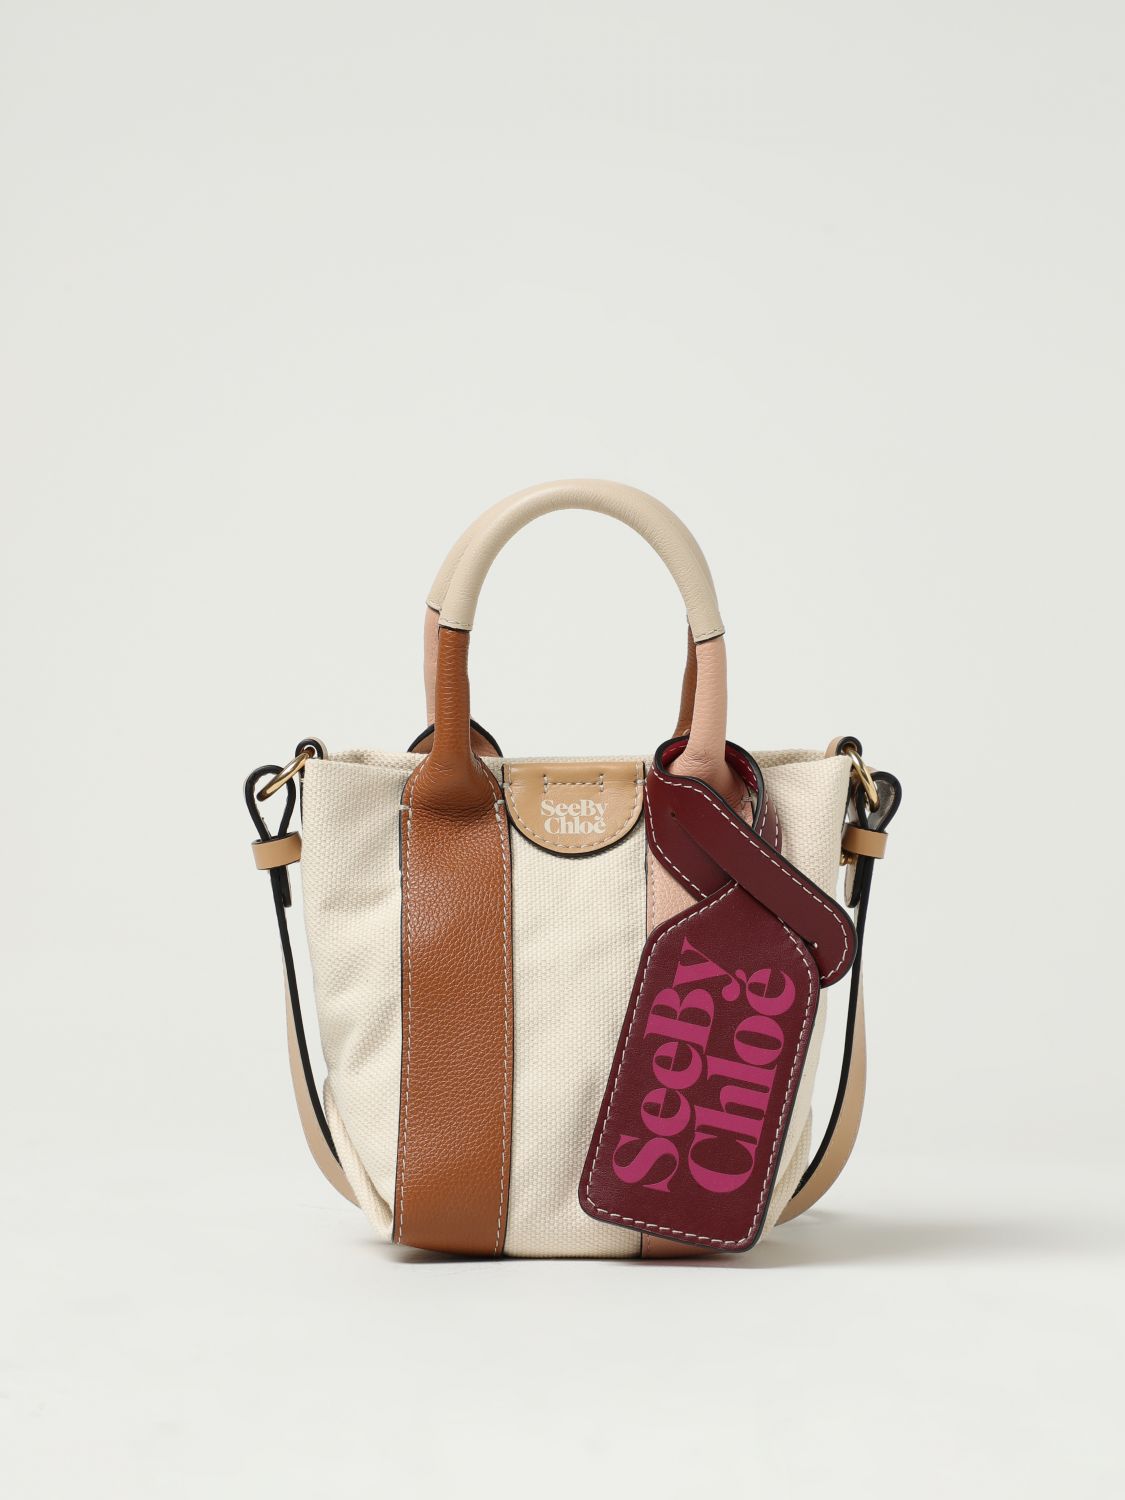 SEE BY CHLOÉ LAETIZIA BAG IN CANVAS AND LEATHER,E75415032